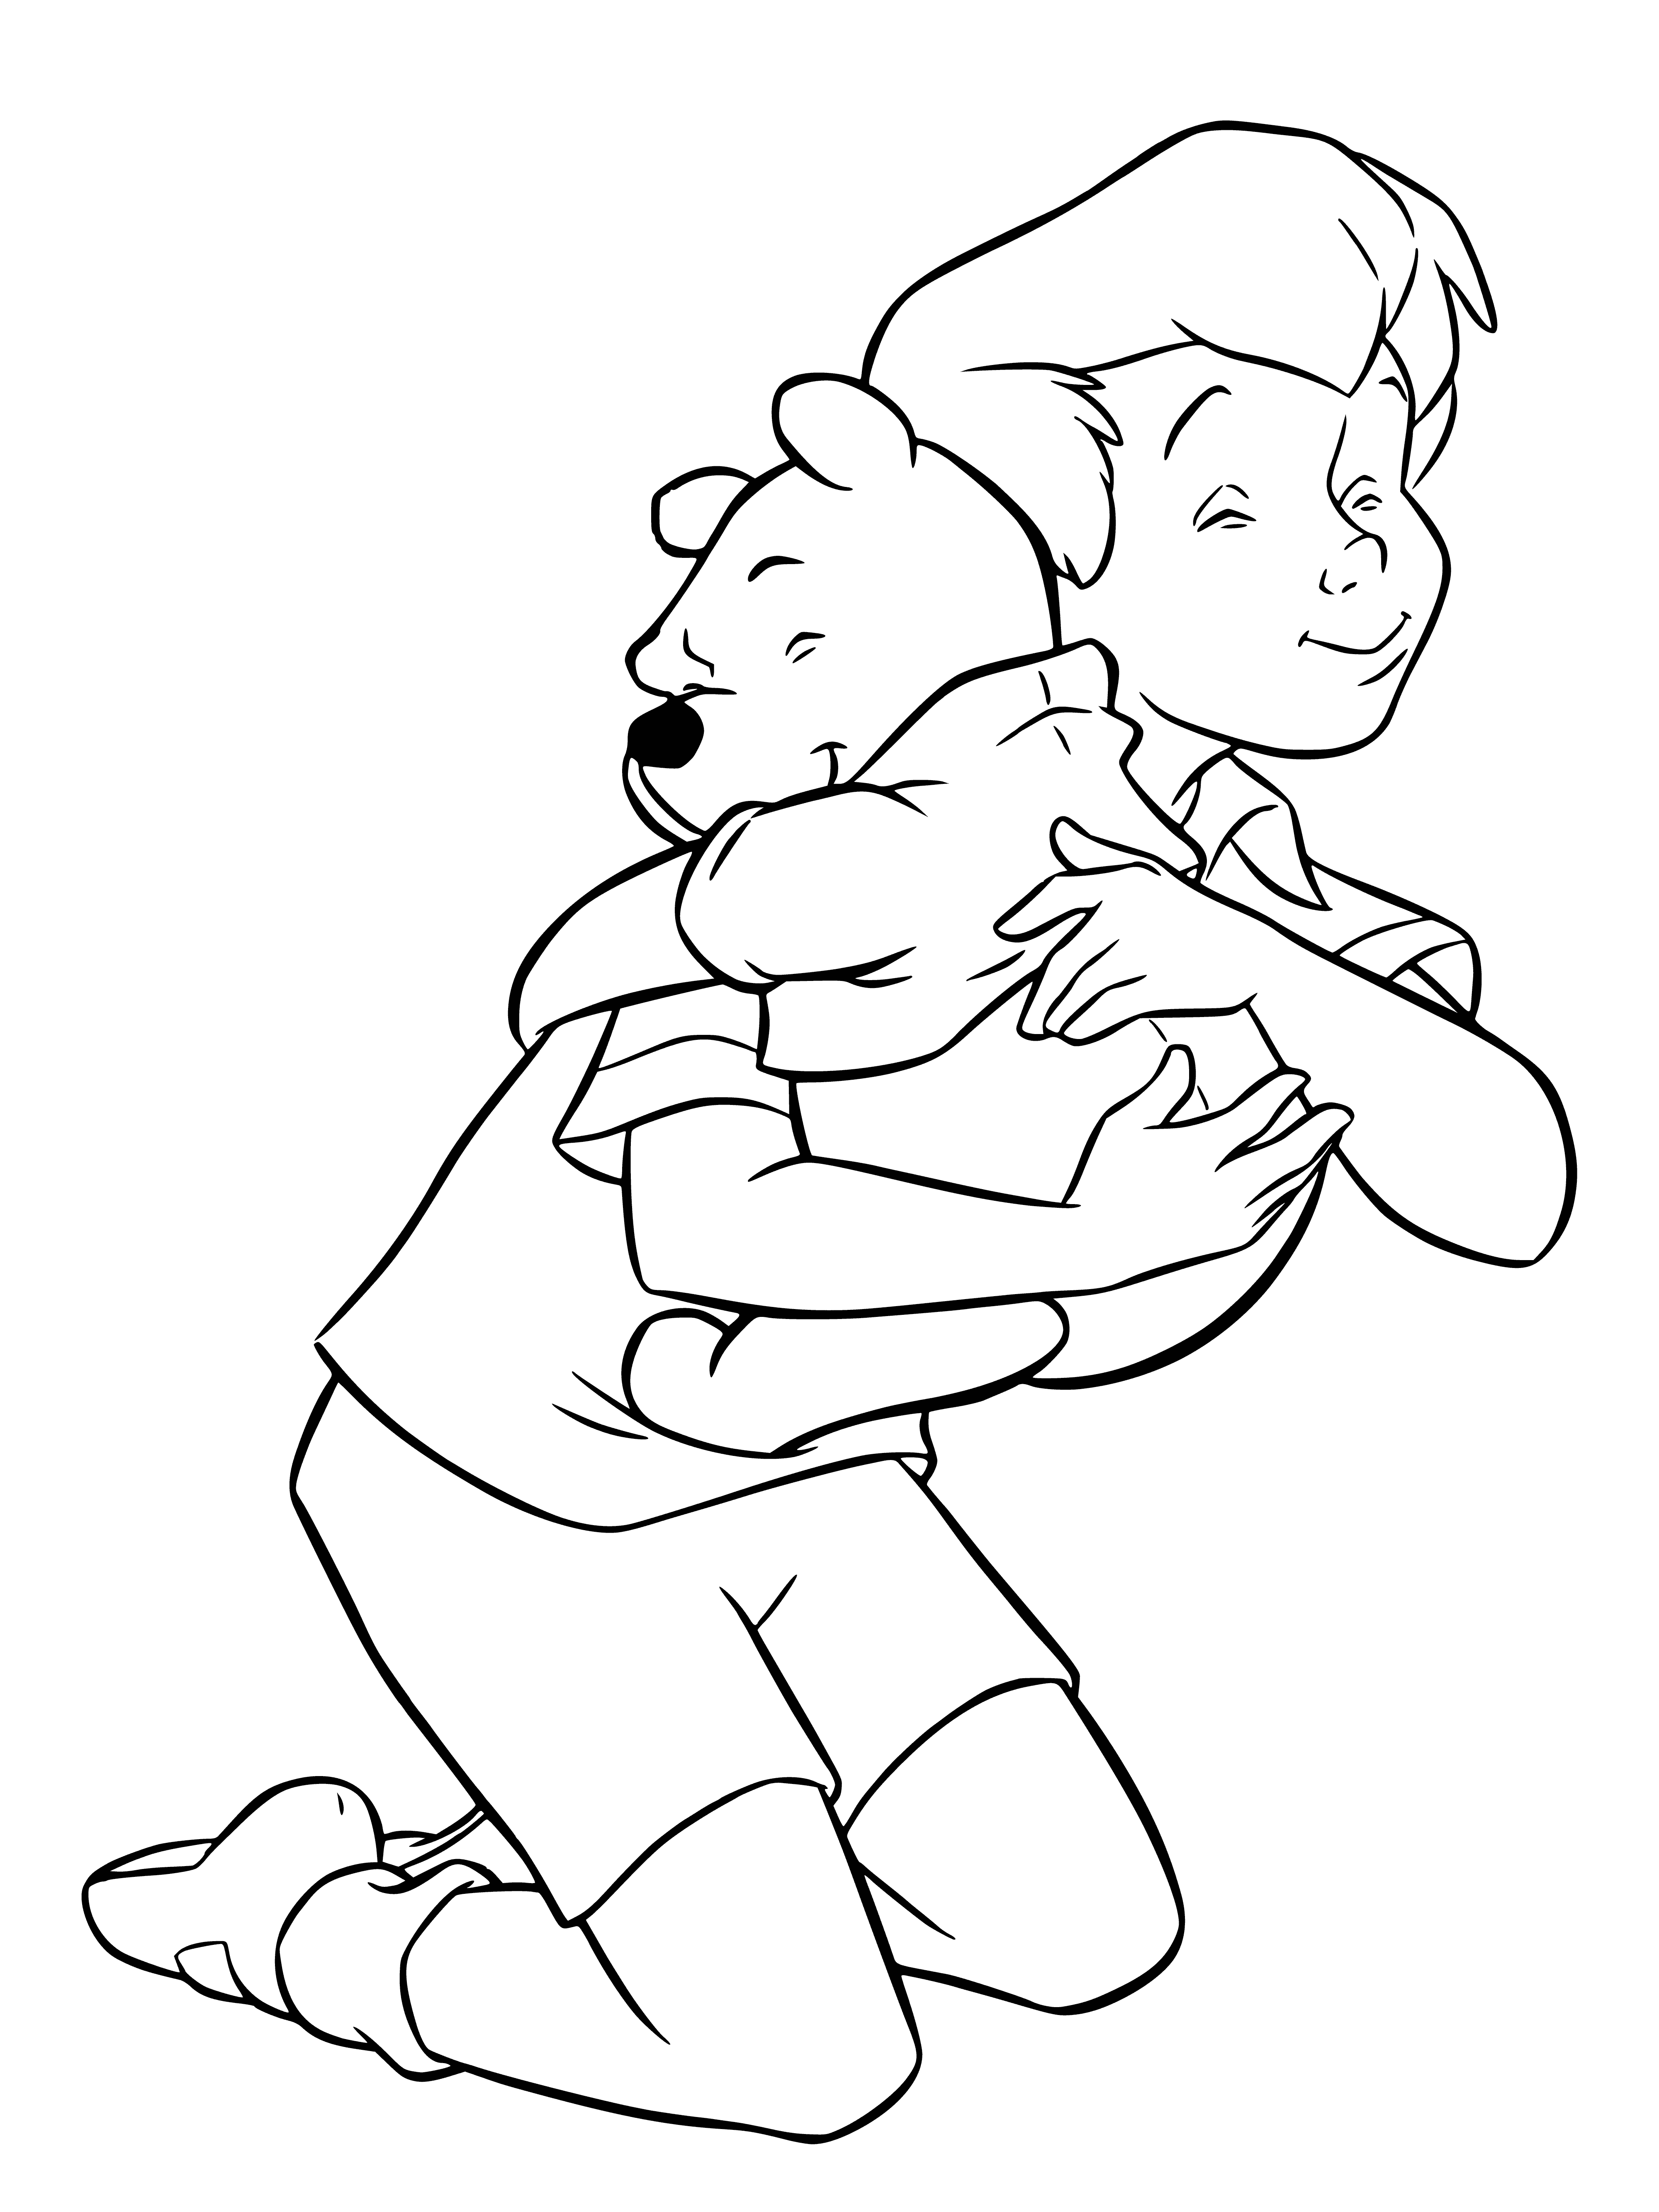 coloring page: Christopher Robin hugs Winnie the Pooh while a butterfly and bee watch nearby in a lovely field.